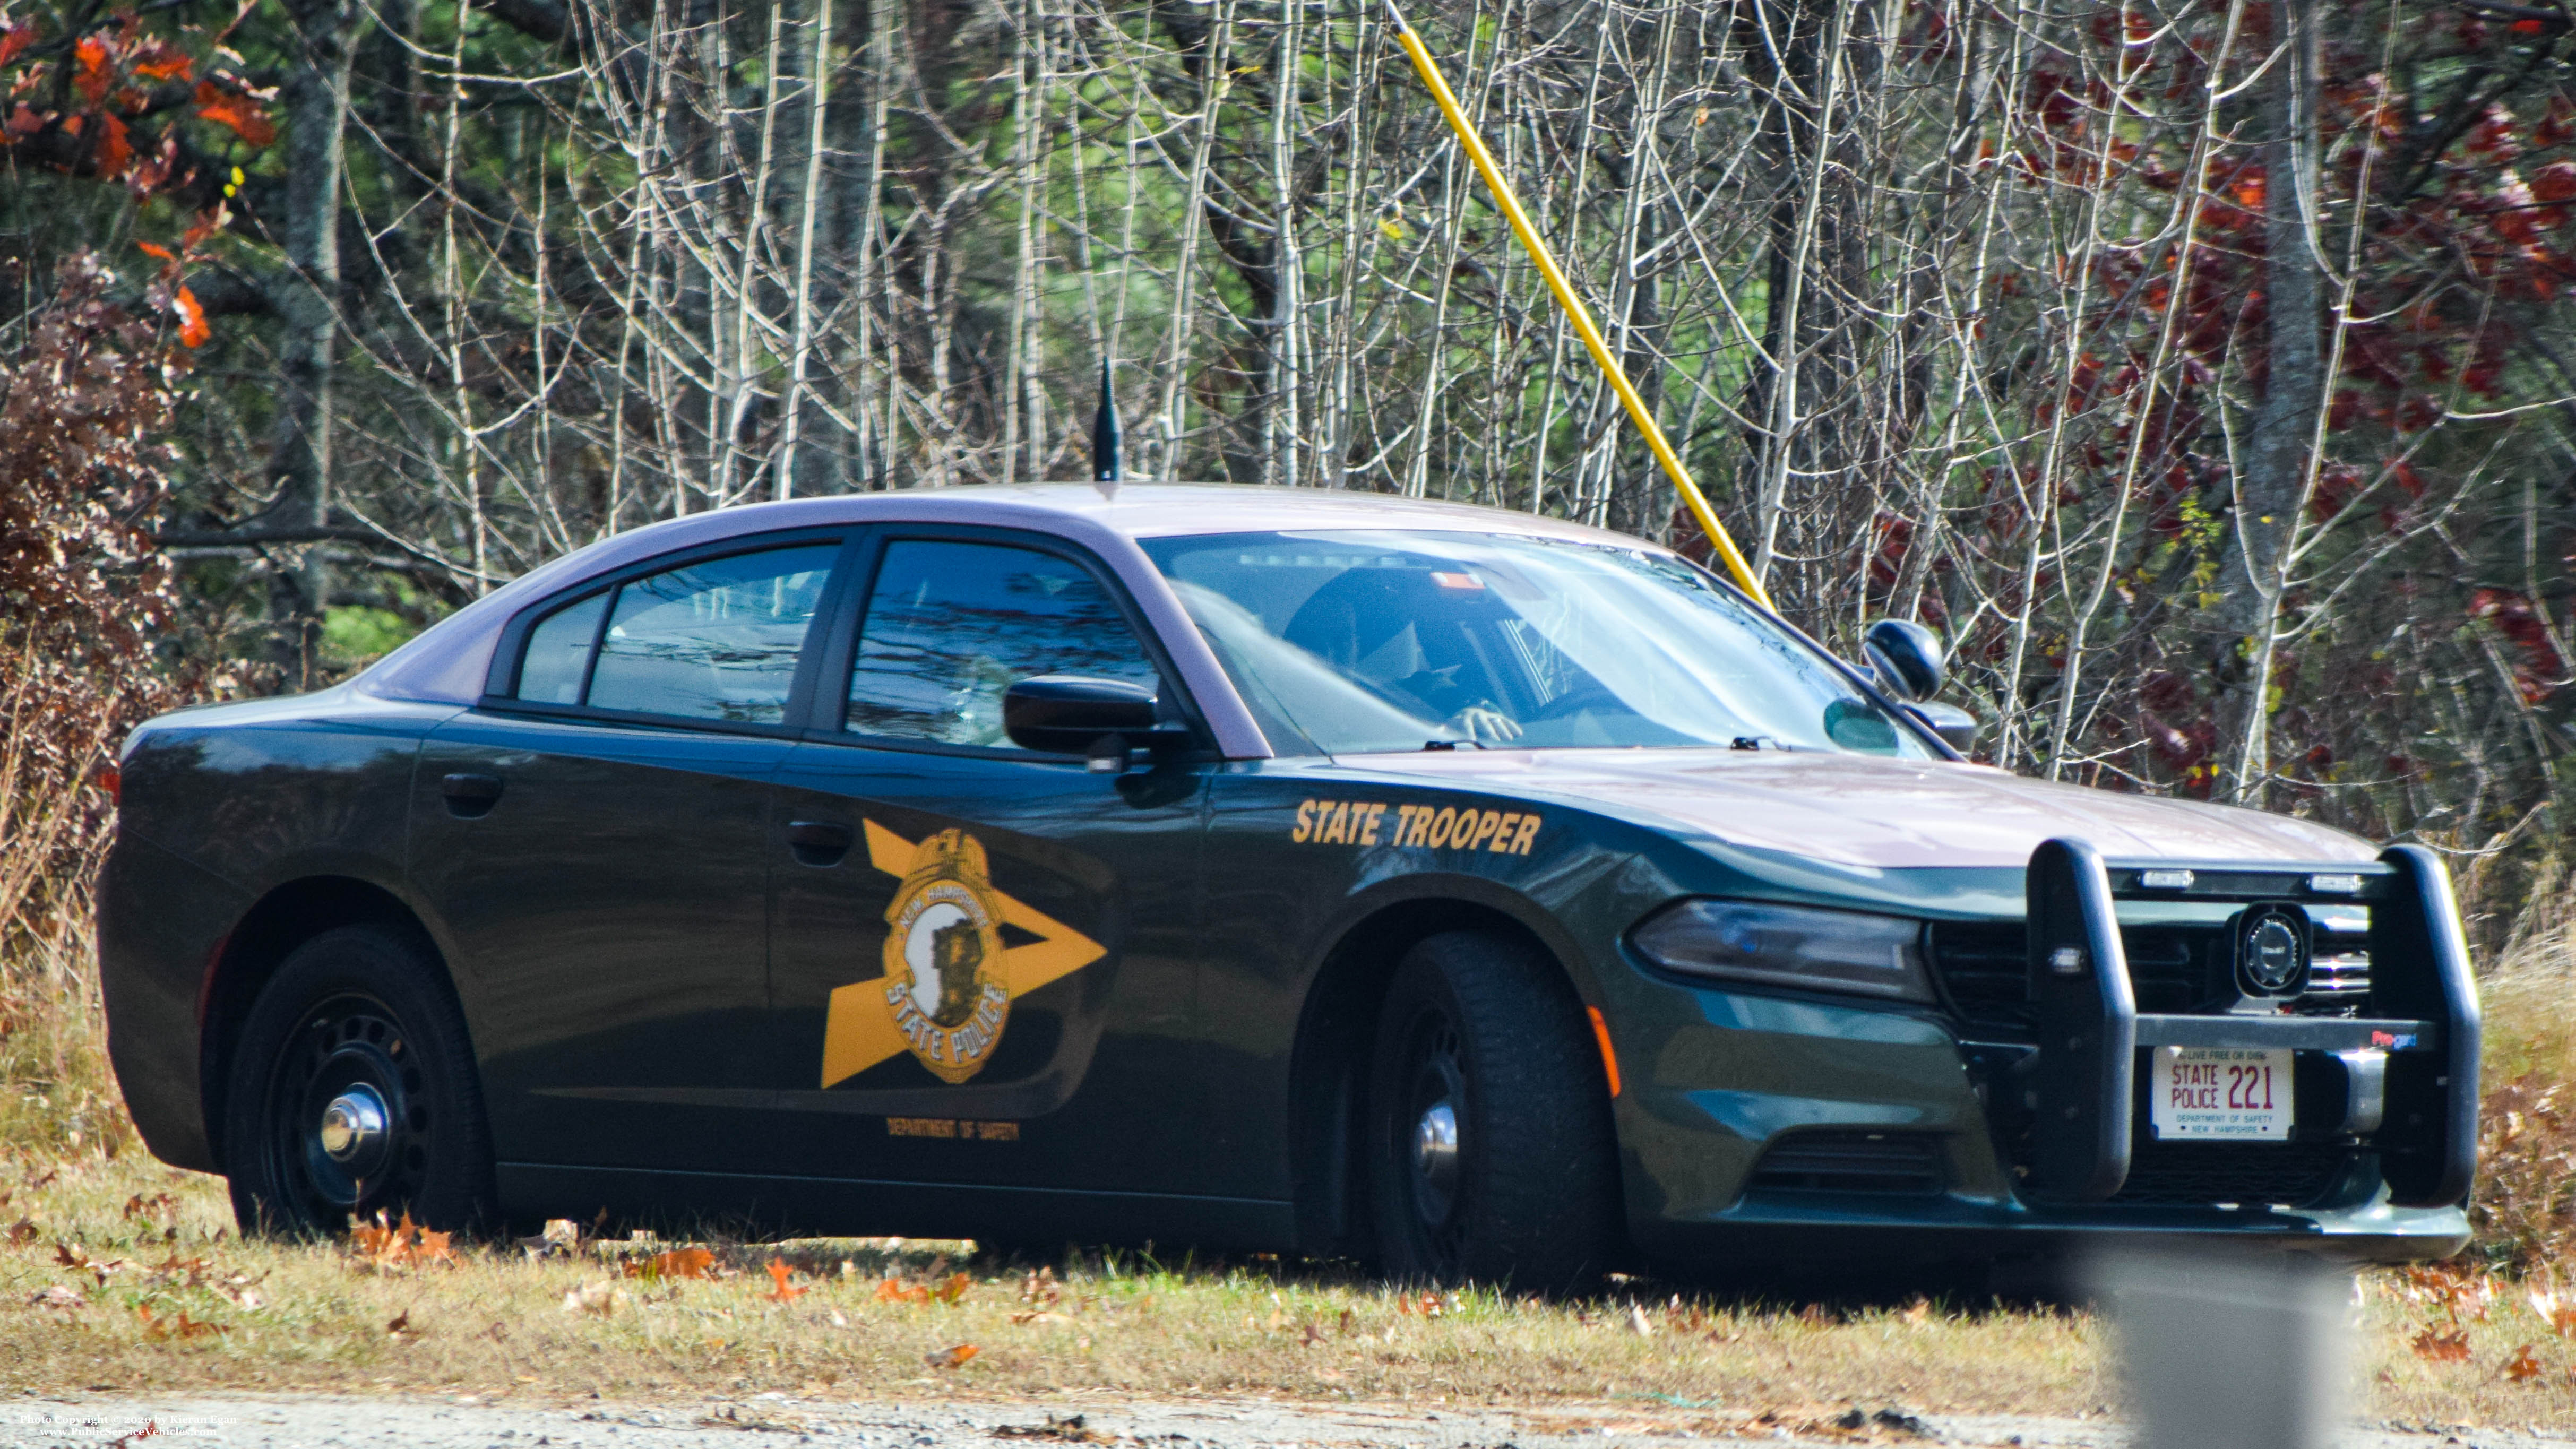 A photo  of New Hampshire State Police
            Cruiser 221, a 2015-2019 Dodge Charger             taken by Kieran Egan